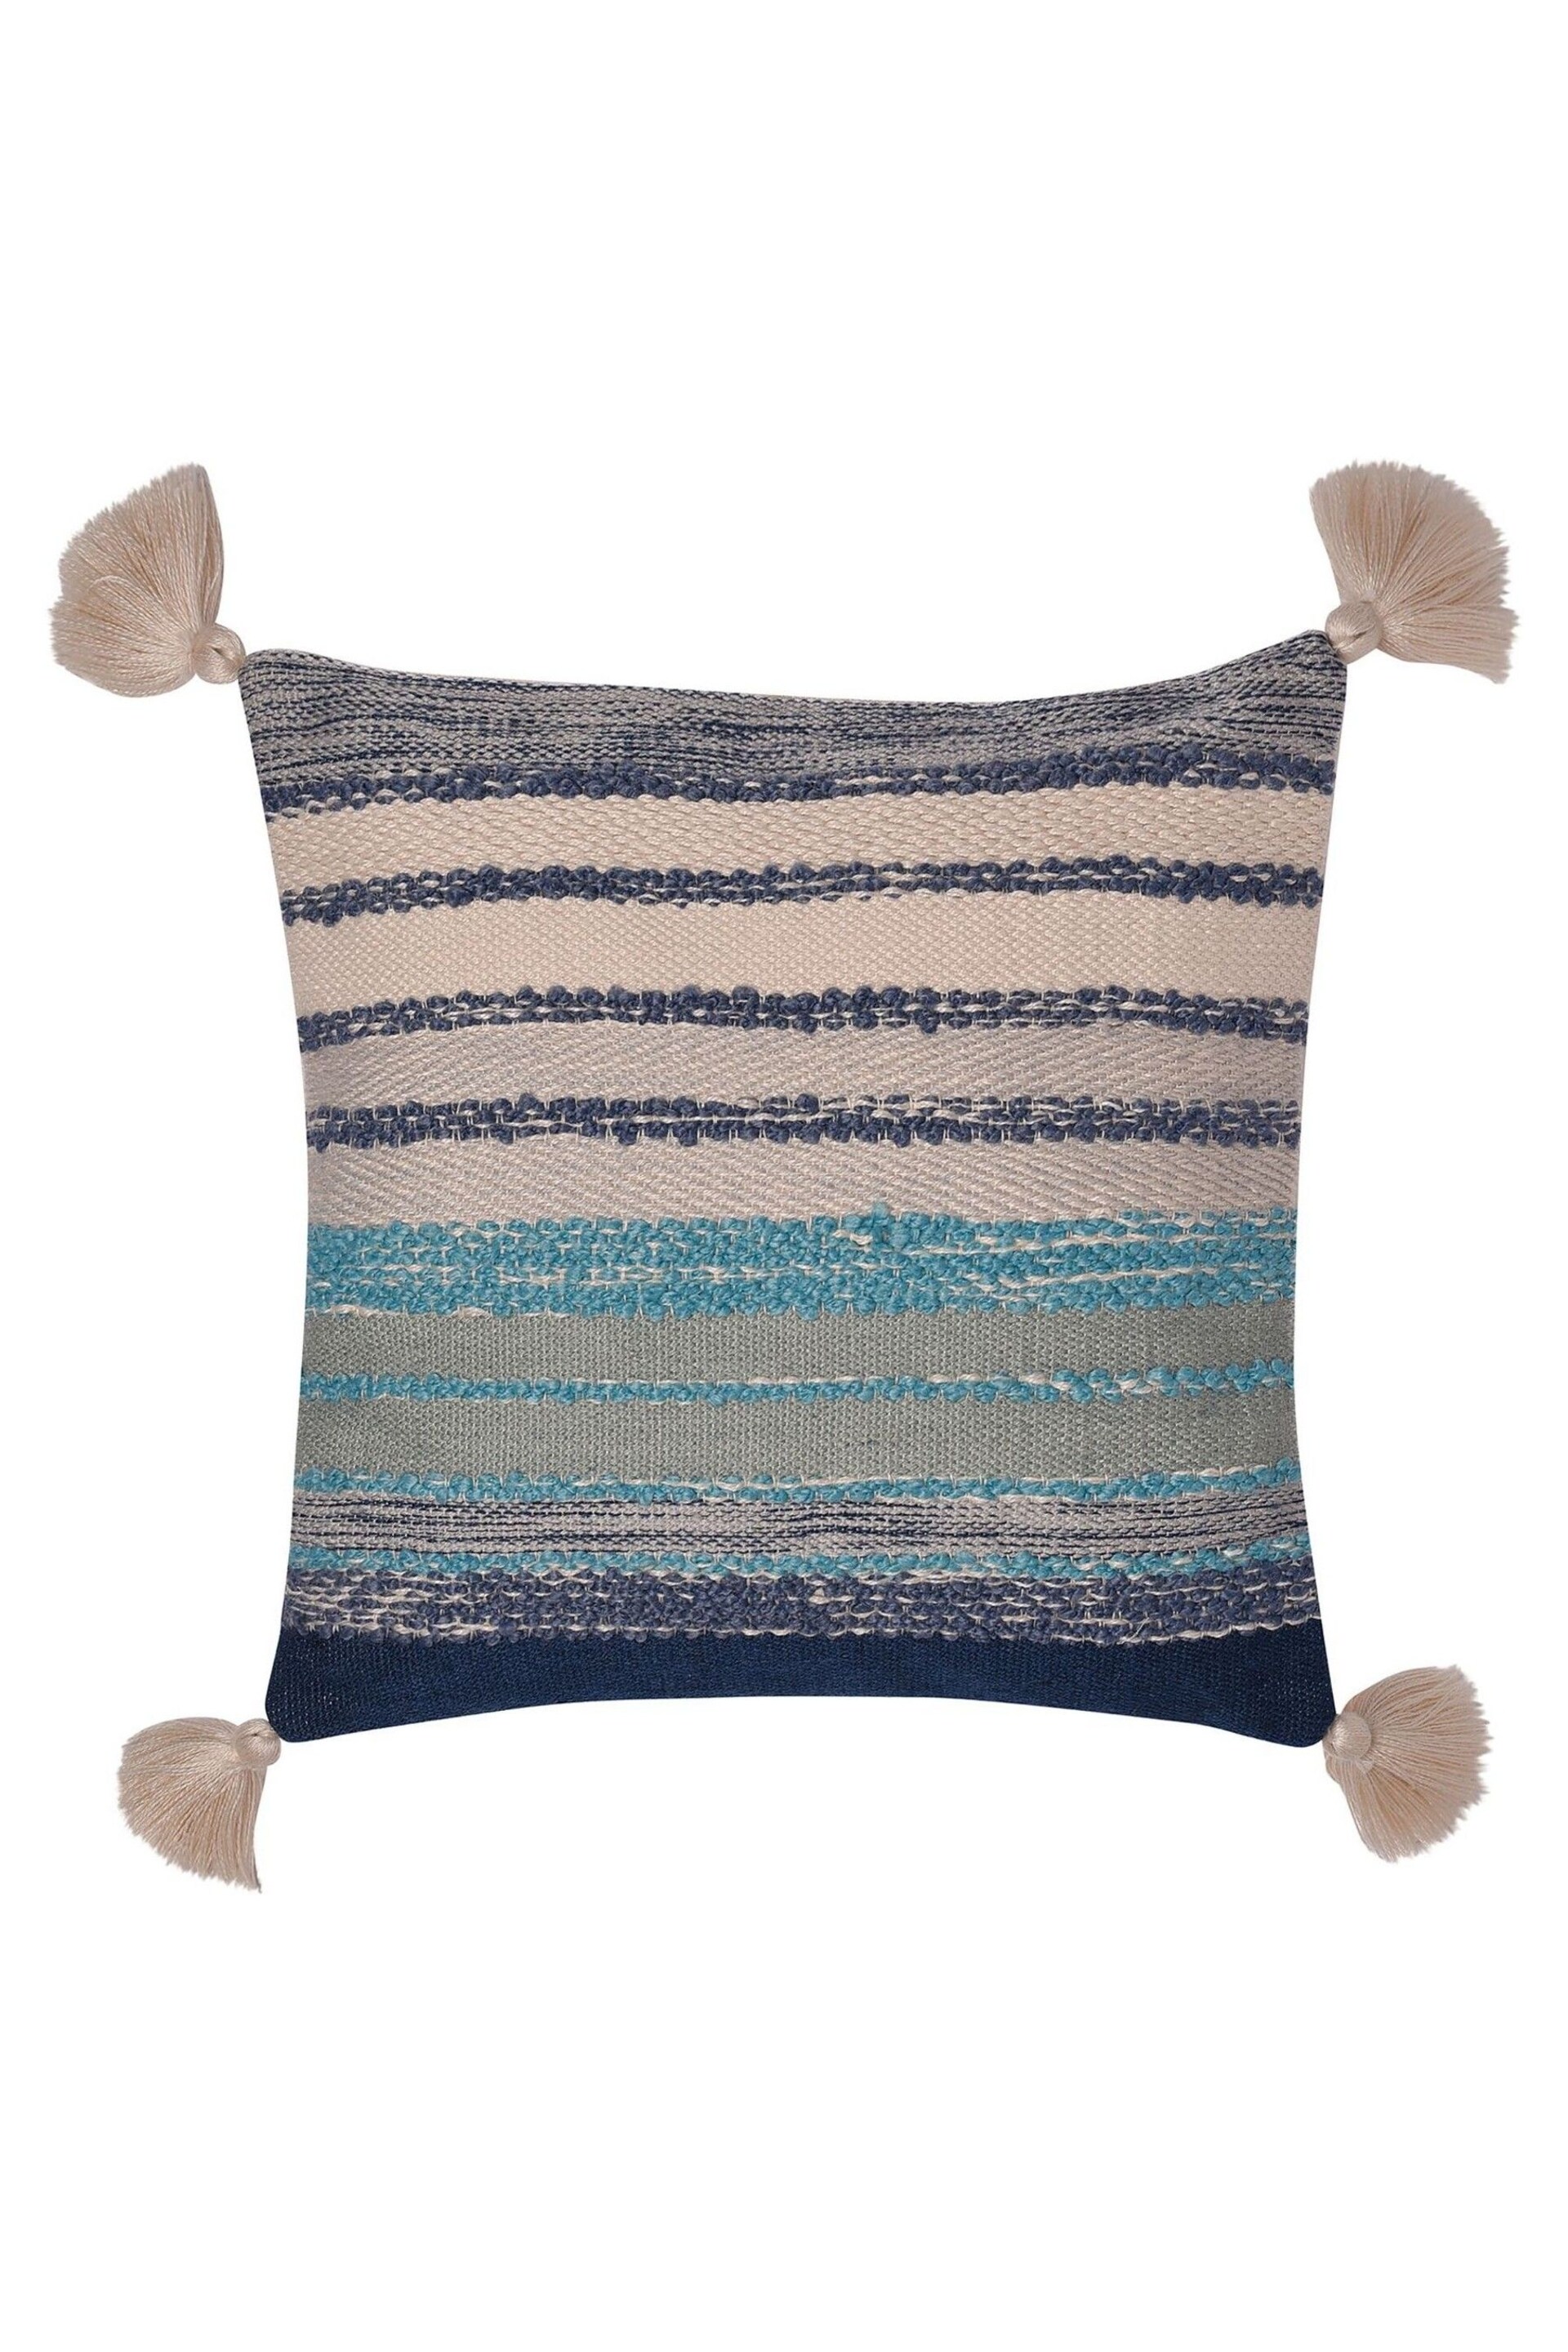 Drift Home Blue Alda Outdoor Textured Filled Cushion - Image 2 of 5